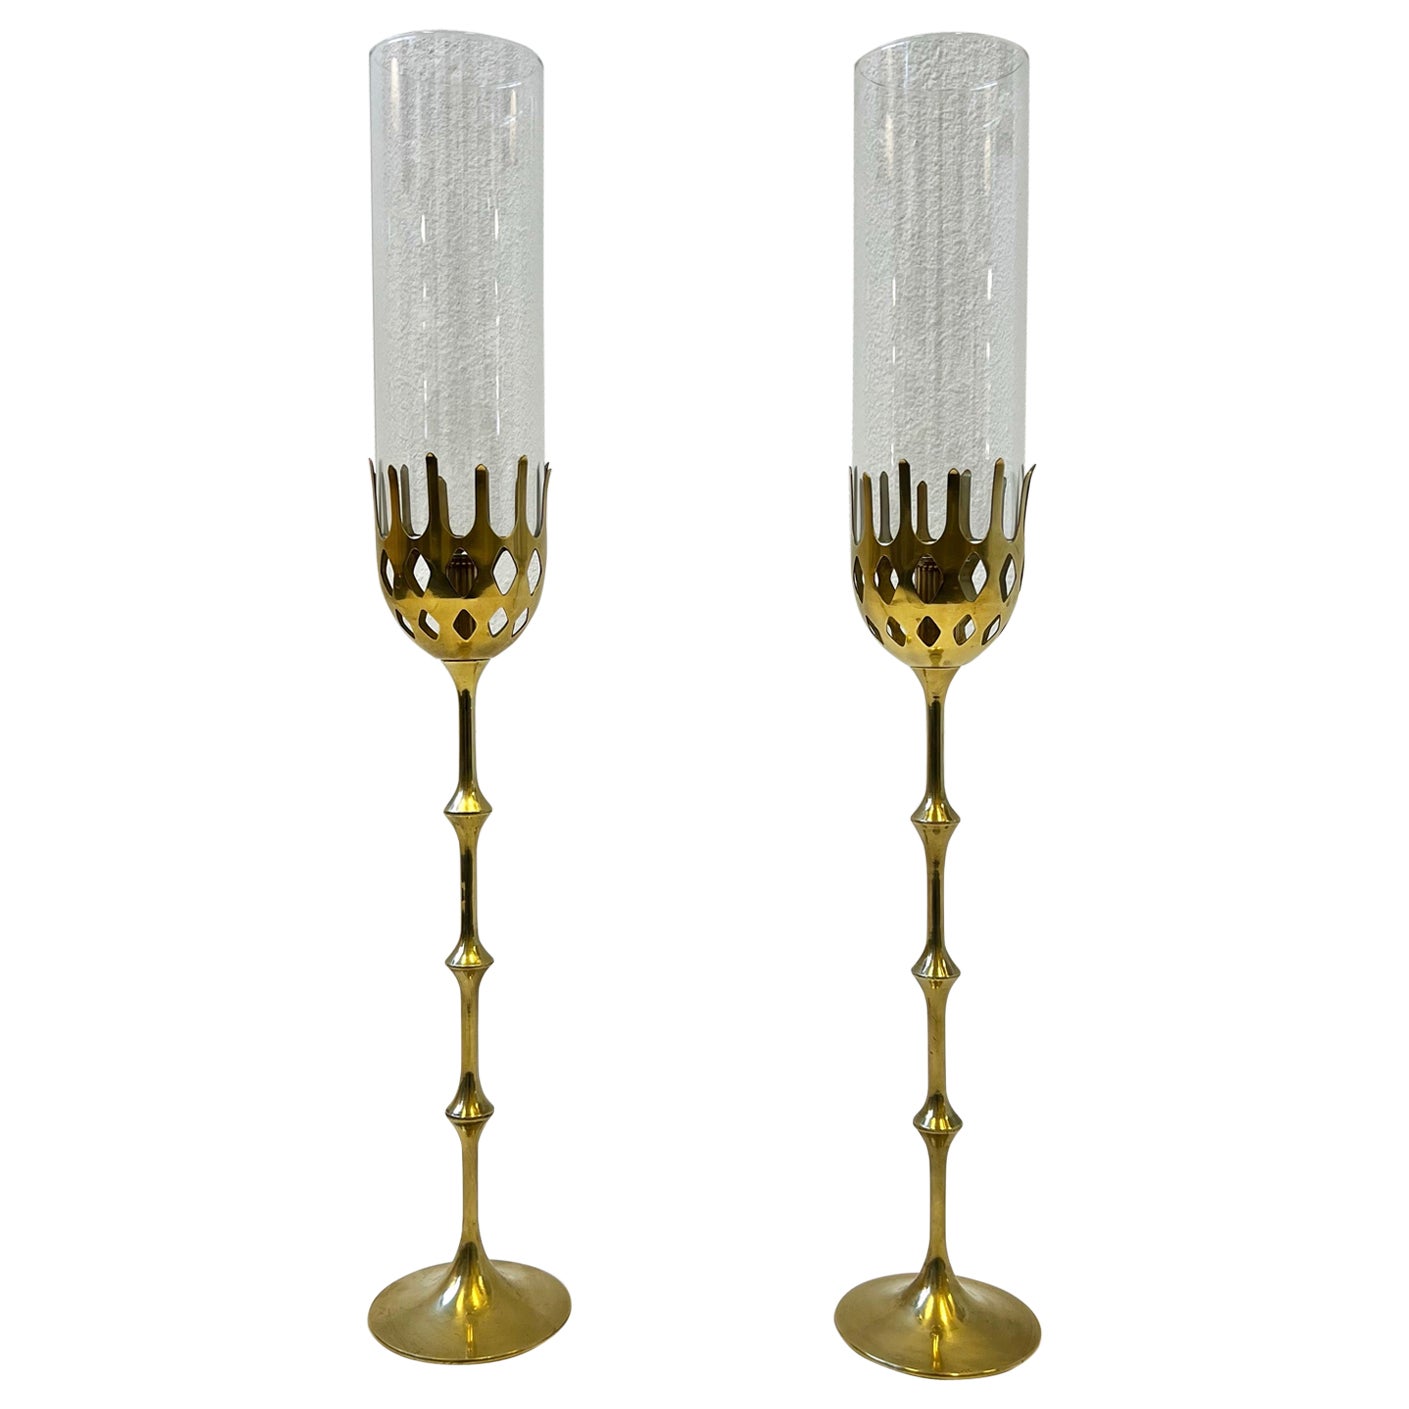 Pair of Brass and Glass Candle Holders by Bijørn Wiinblad 